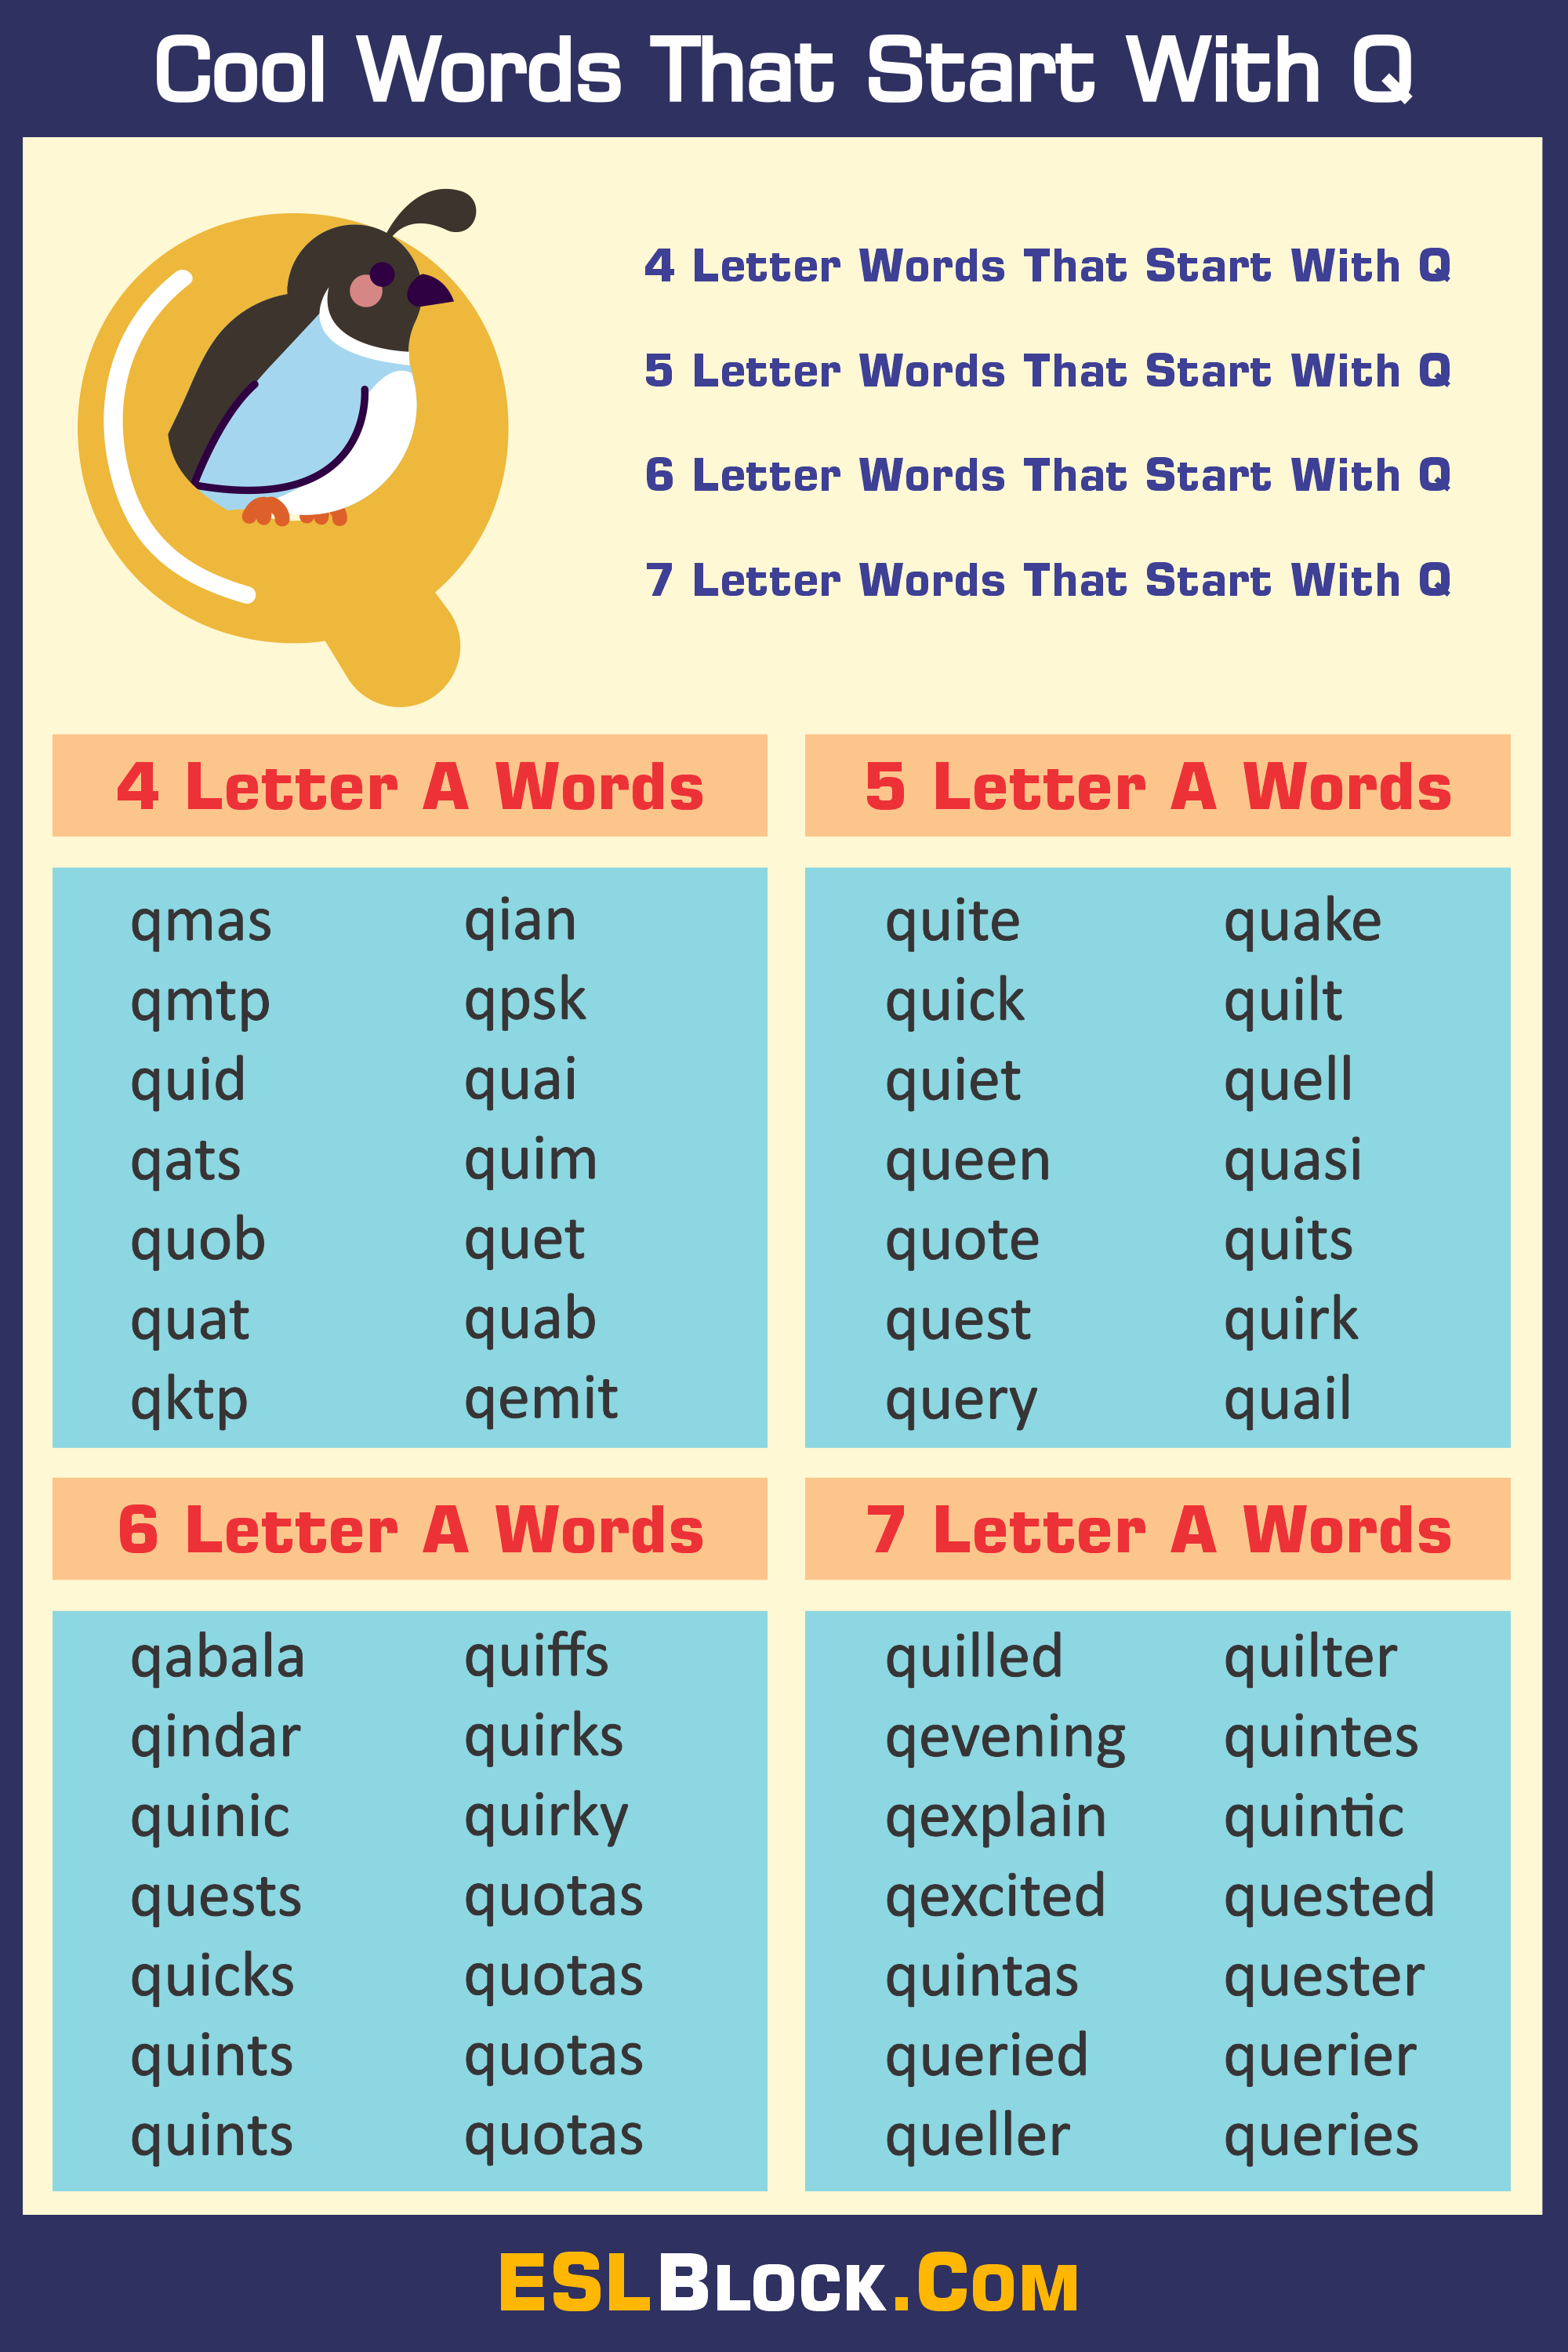 4 Letter Words, 4 Letter Words That Start With Q, 5 Letter Words, 5 Letter Words That Start With Q, 6 Letter Words, 6 Letter Words That Start With Q, 7 Letter Words, 7 Letter Words That Start With Q, Awesome Cool Words, Christmas Words That Start With Q, Cool Words, Describing Words That Start With Q, Descriptive Words That Start With Q, English Words, Five Letter Words Starting with Q, Good Words That Start With Q, Nice Words That Start With Q, Positive Words That Start With Q, Q Words, Unique Words, Word Dictionary, Words That Start With Q, Words That Start With Q to Describe Someone